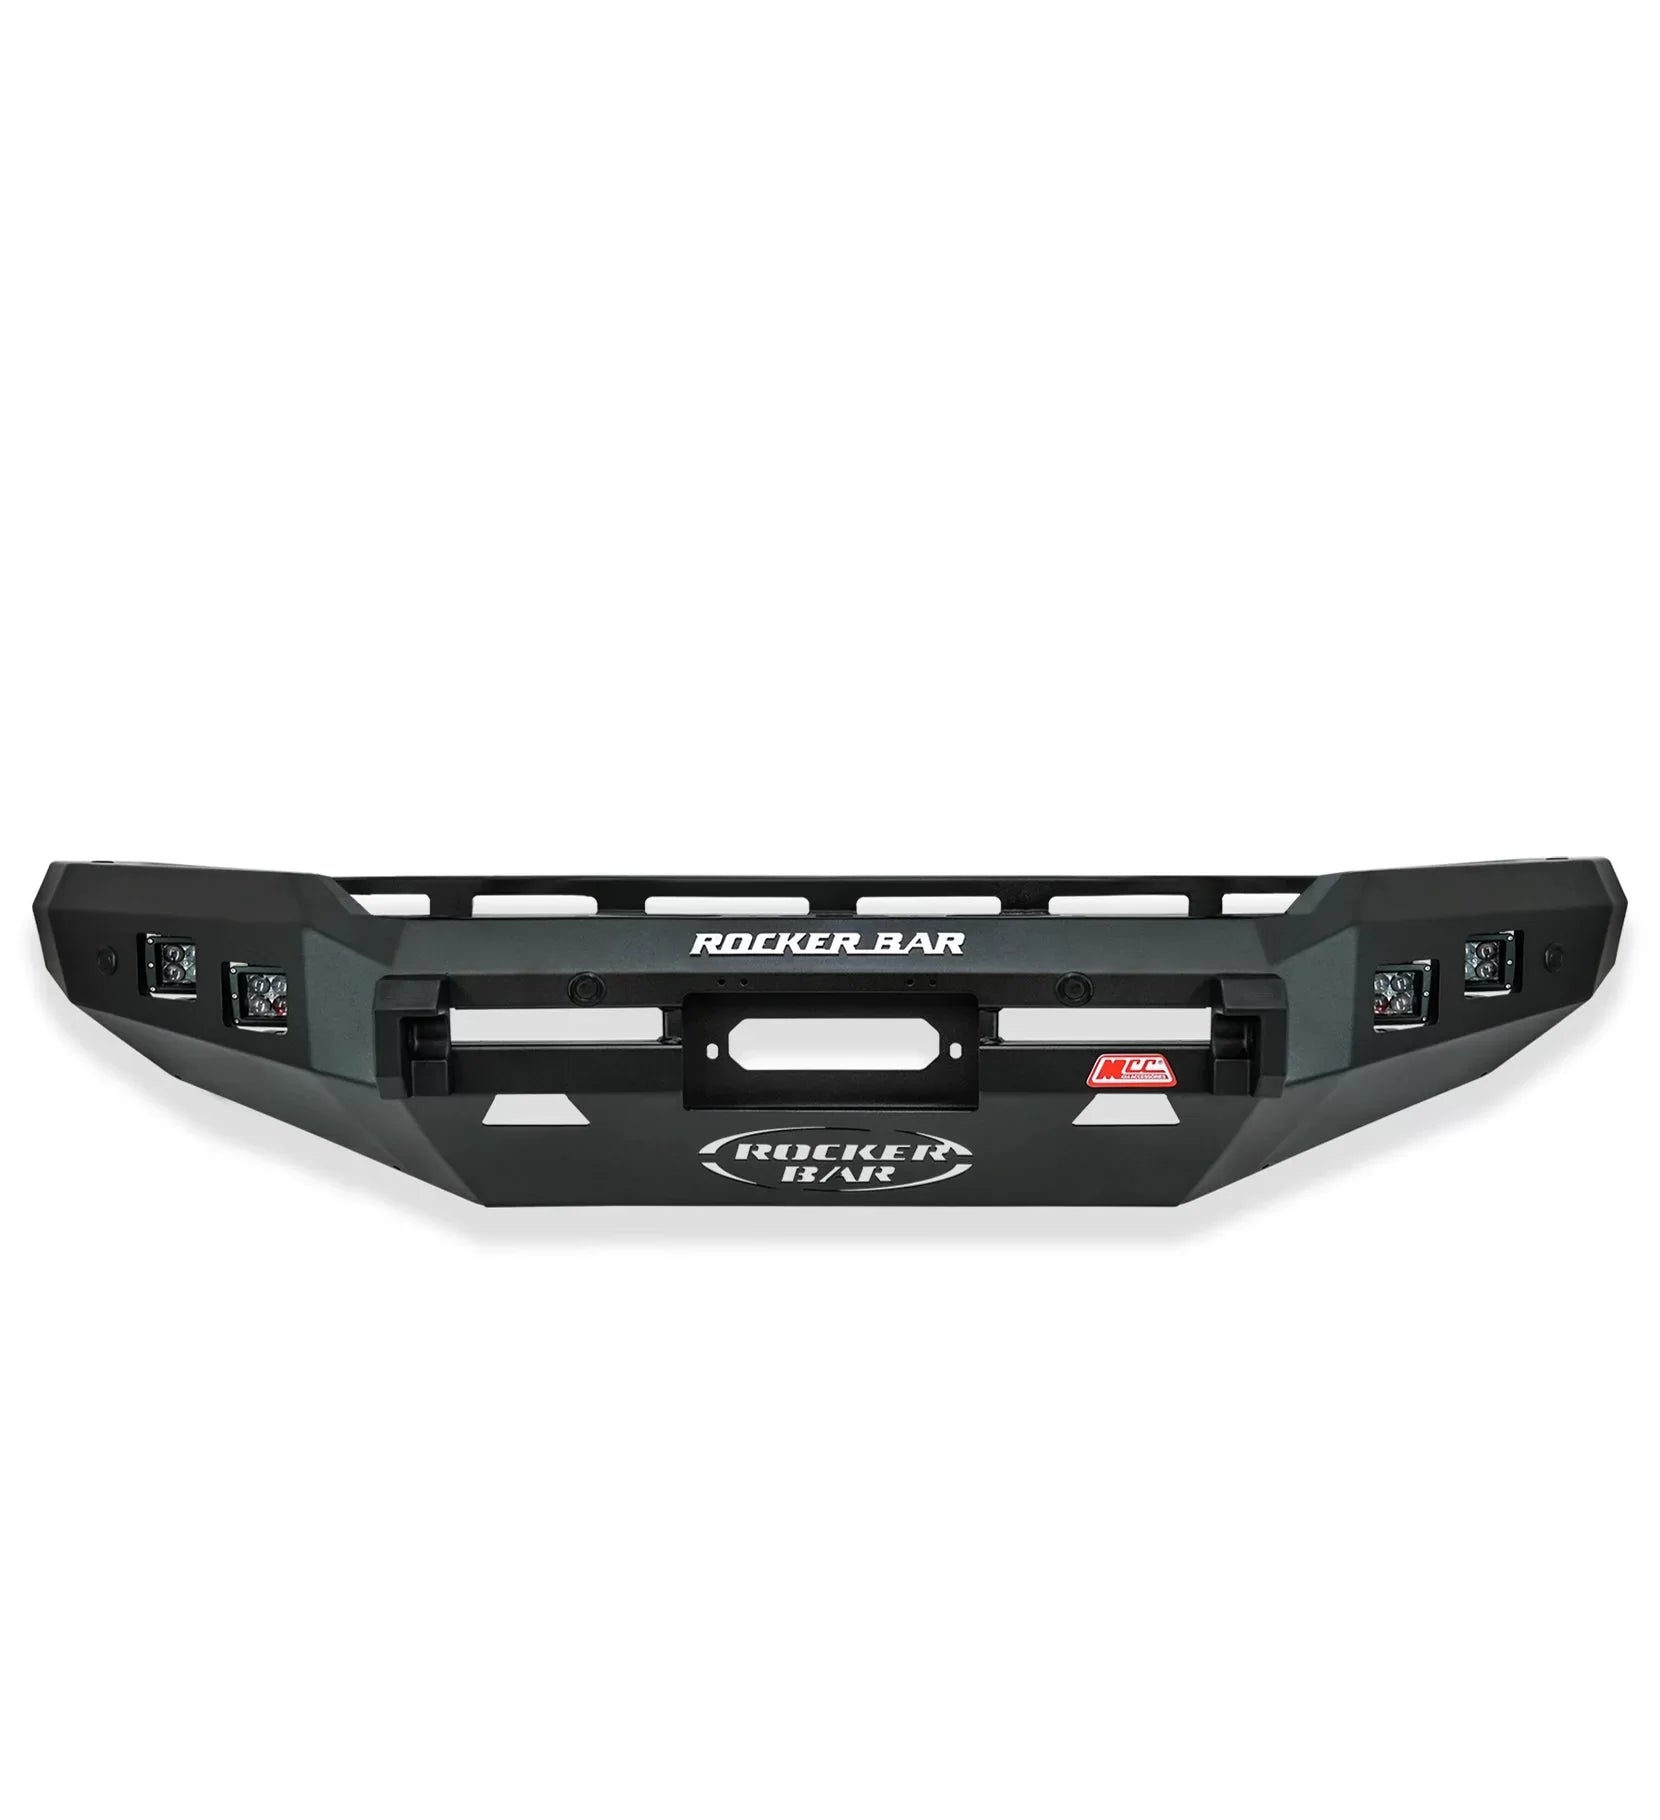 Bt50 12-20 078-01sq Rocker Front Bar Square Light No Loop + Bracket + Underprotection Plate If Available